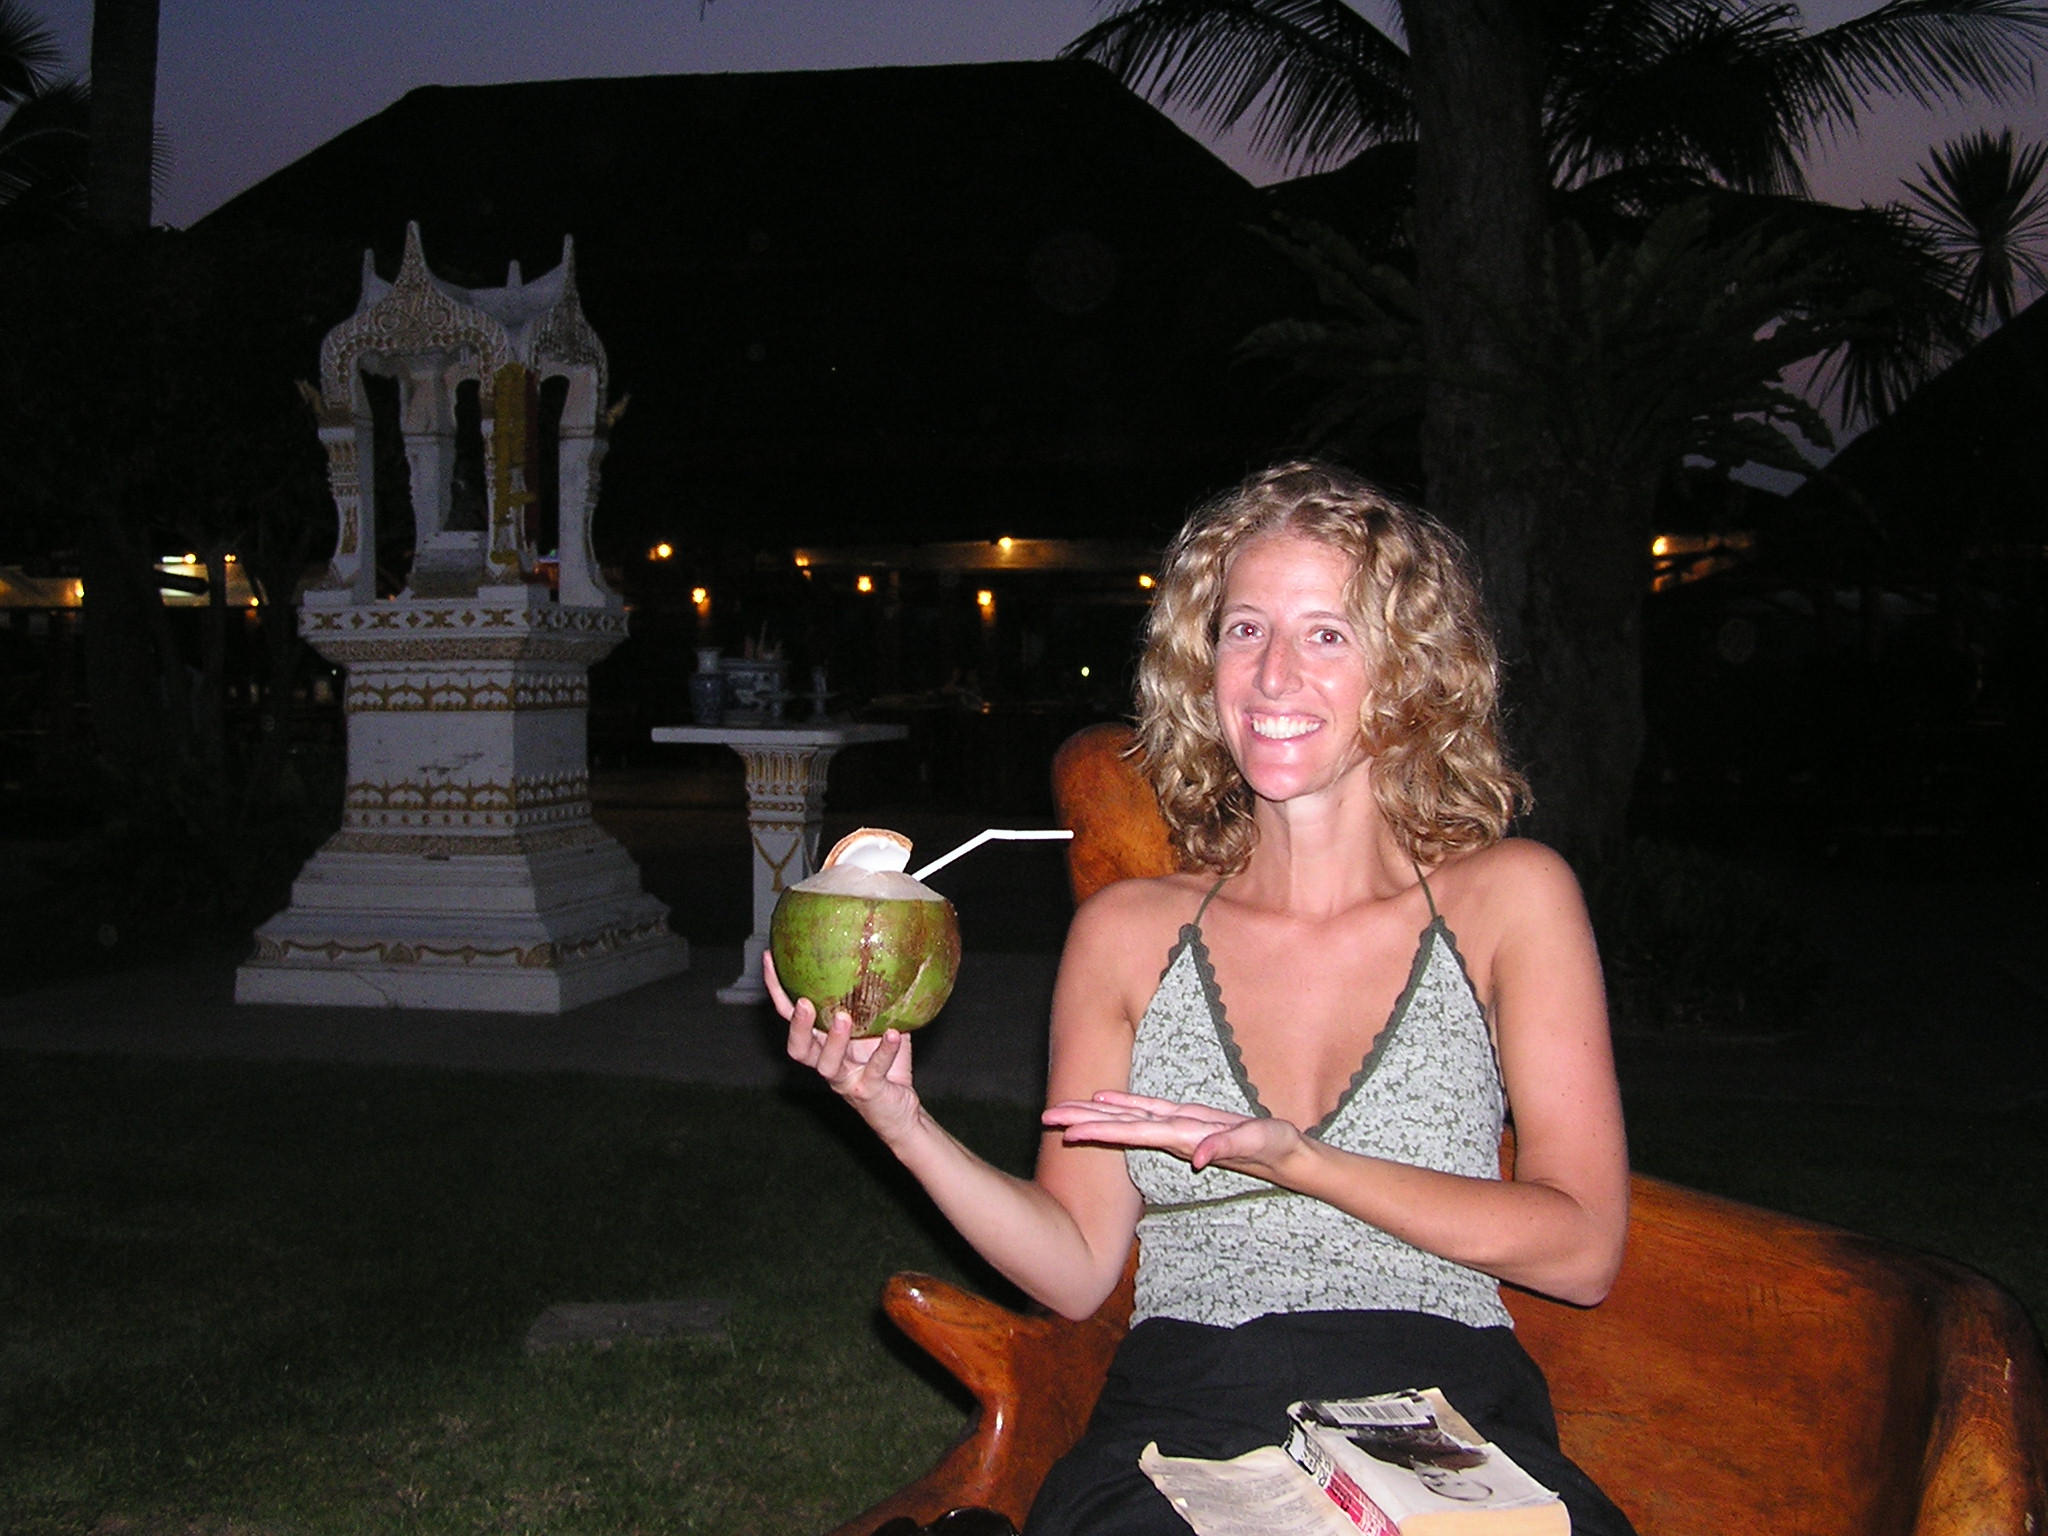 Its all about the coconut juice in Thailand